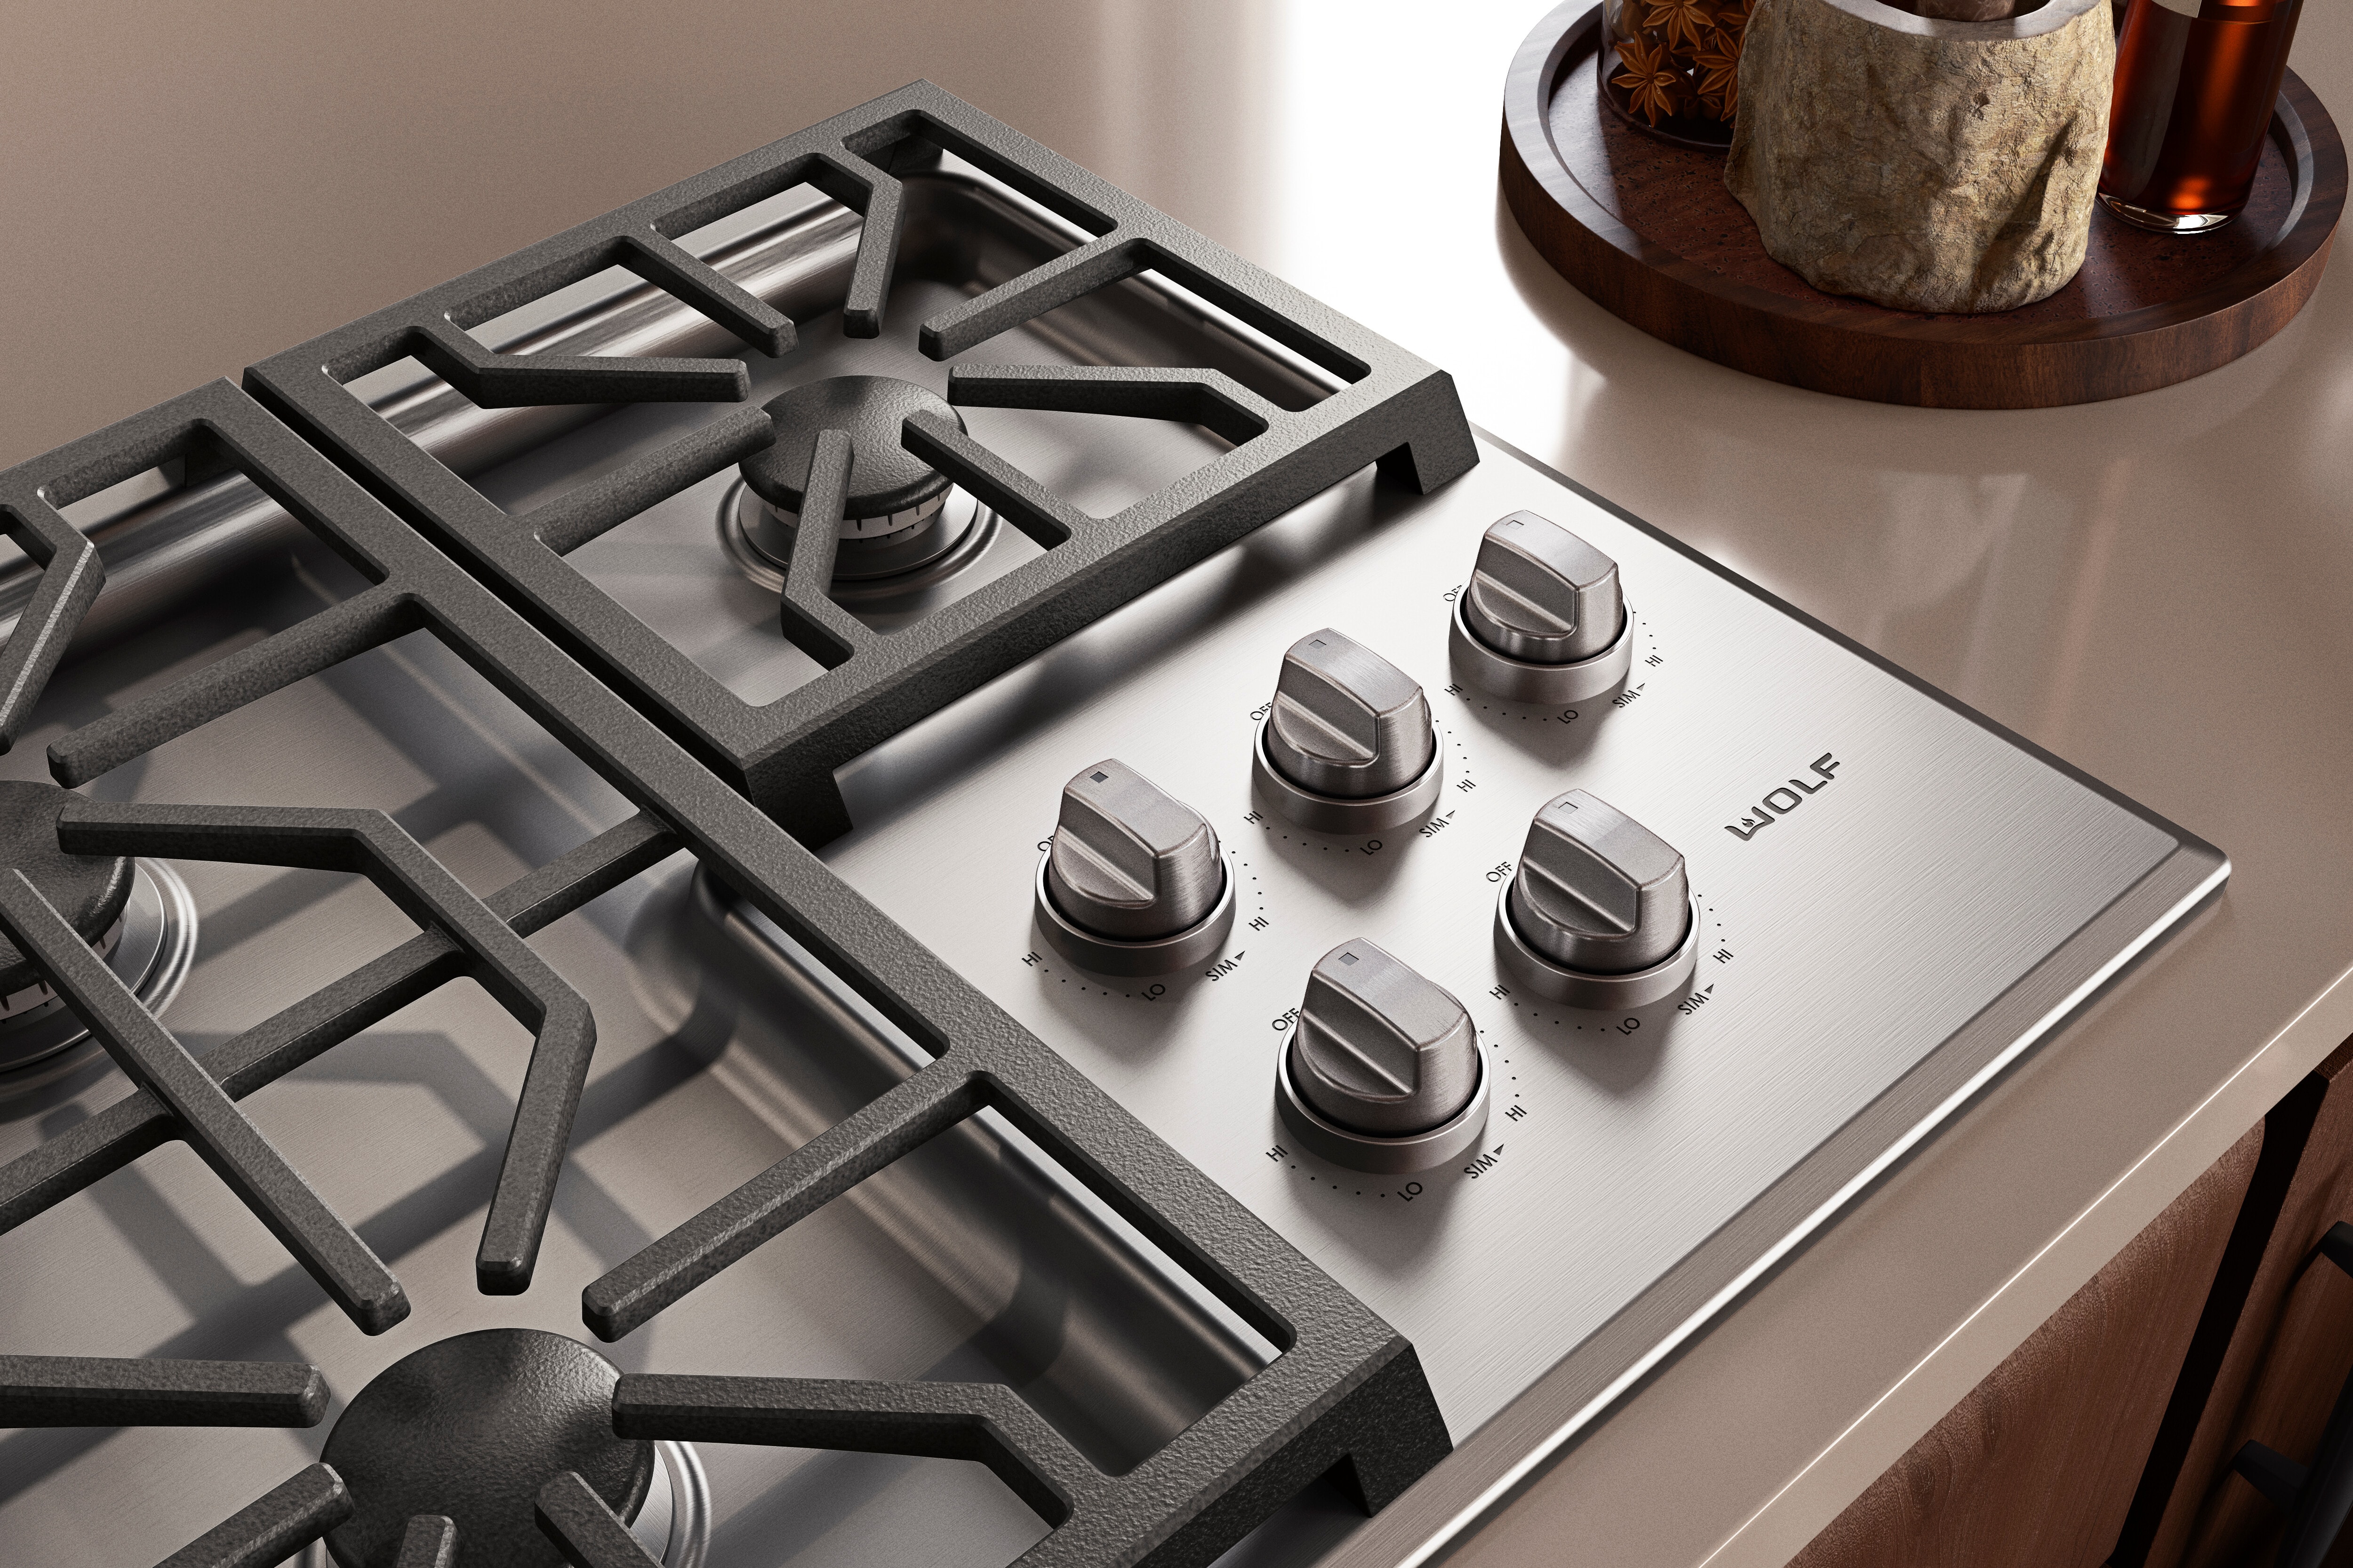 https://www.subzero-wolf.com/wolf/cooktops-and-rangetops/gas-stovetop/-/media/images/web20/pdp-color-options/knobs/22-subzero_knob-bezel-accents_cooktop-cg365ps_ss.jpg